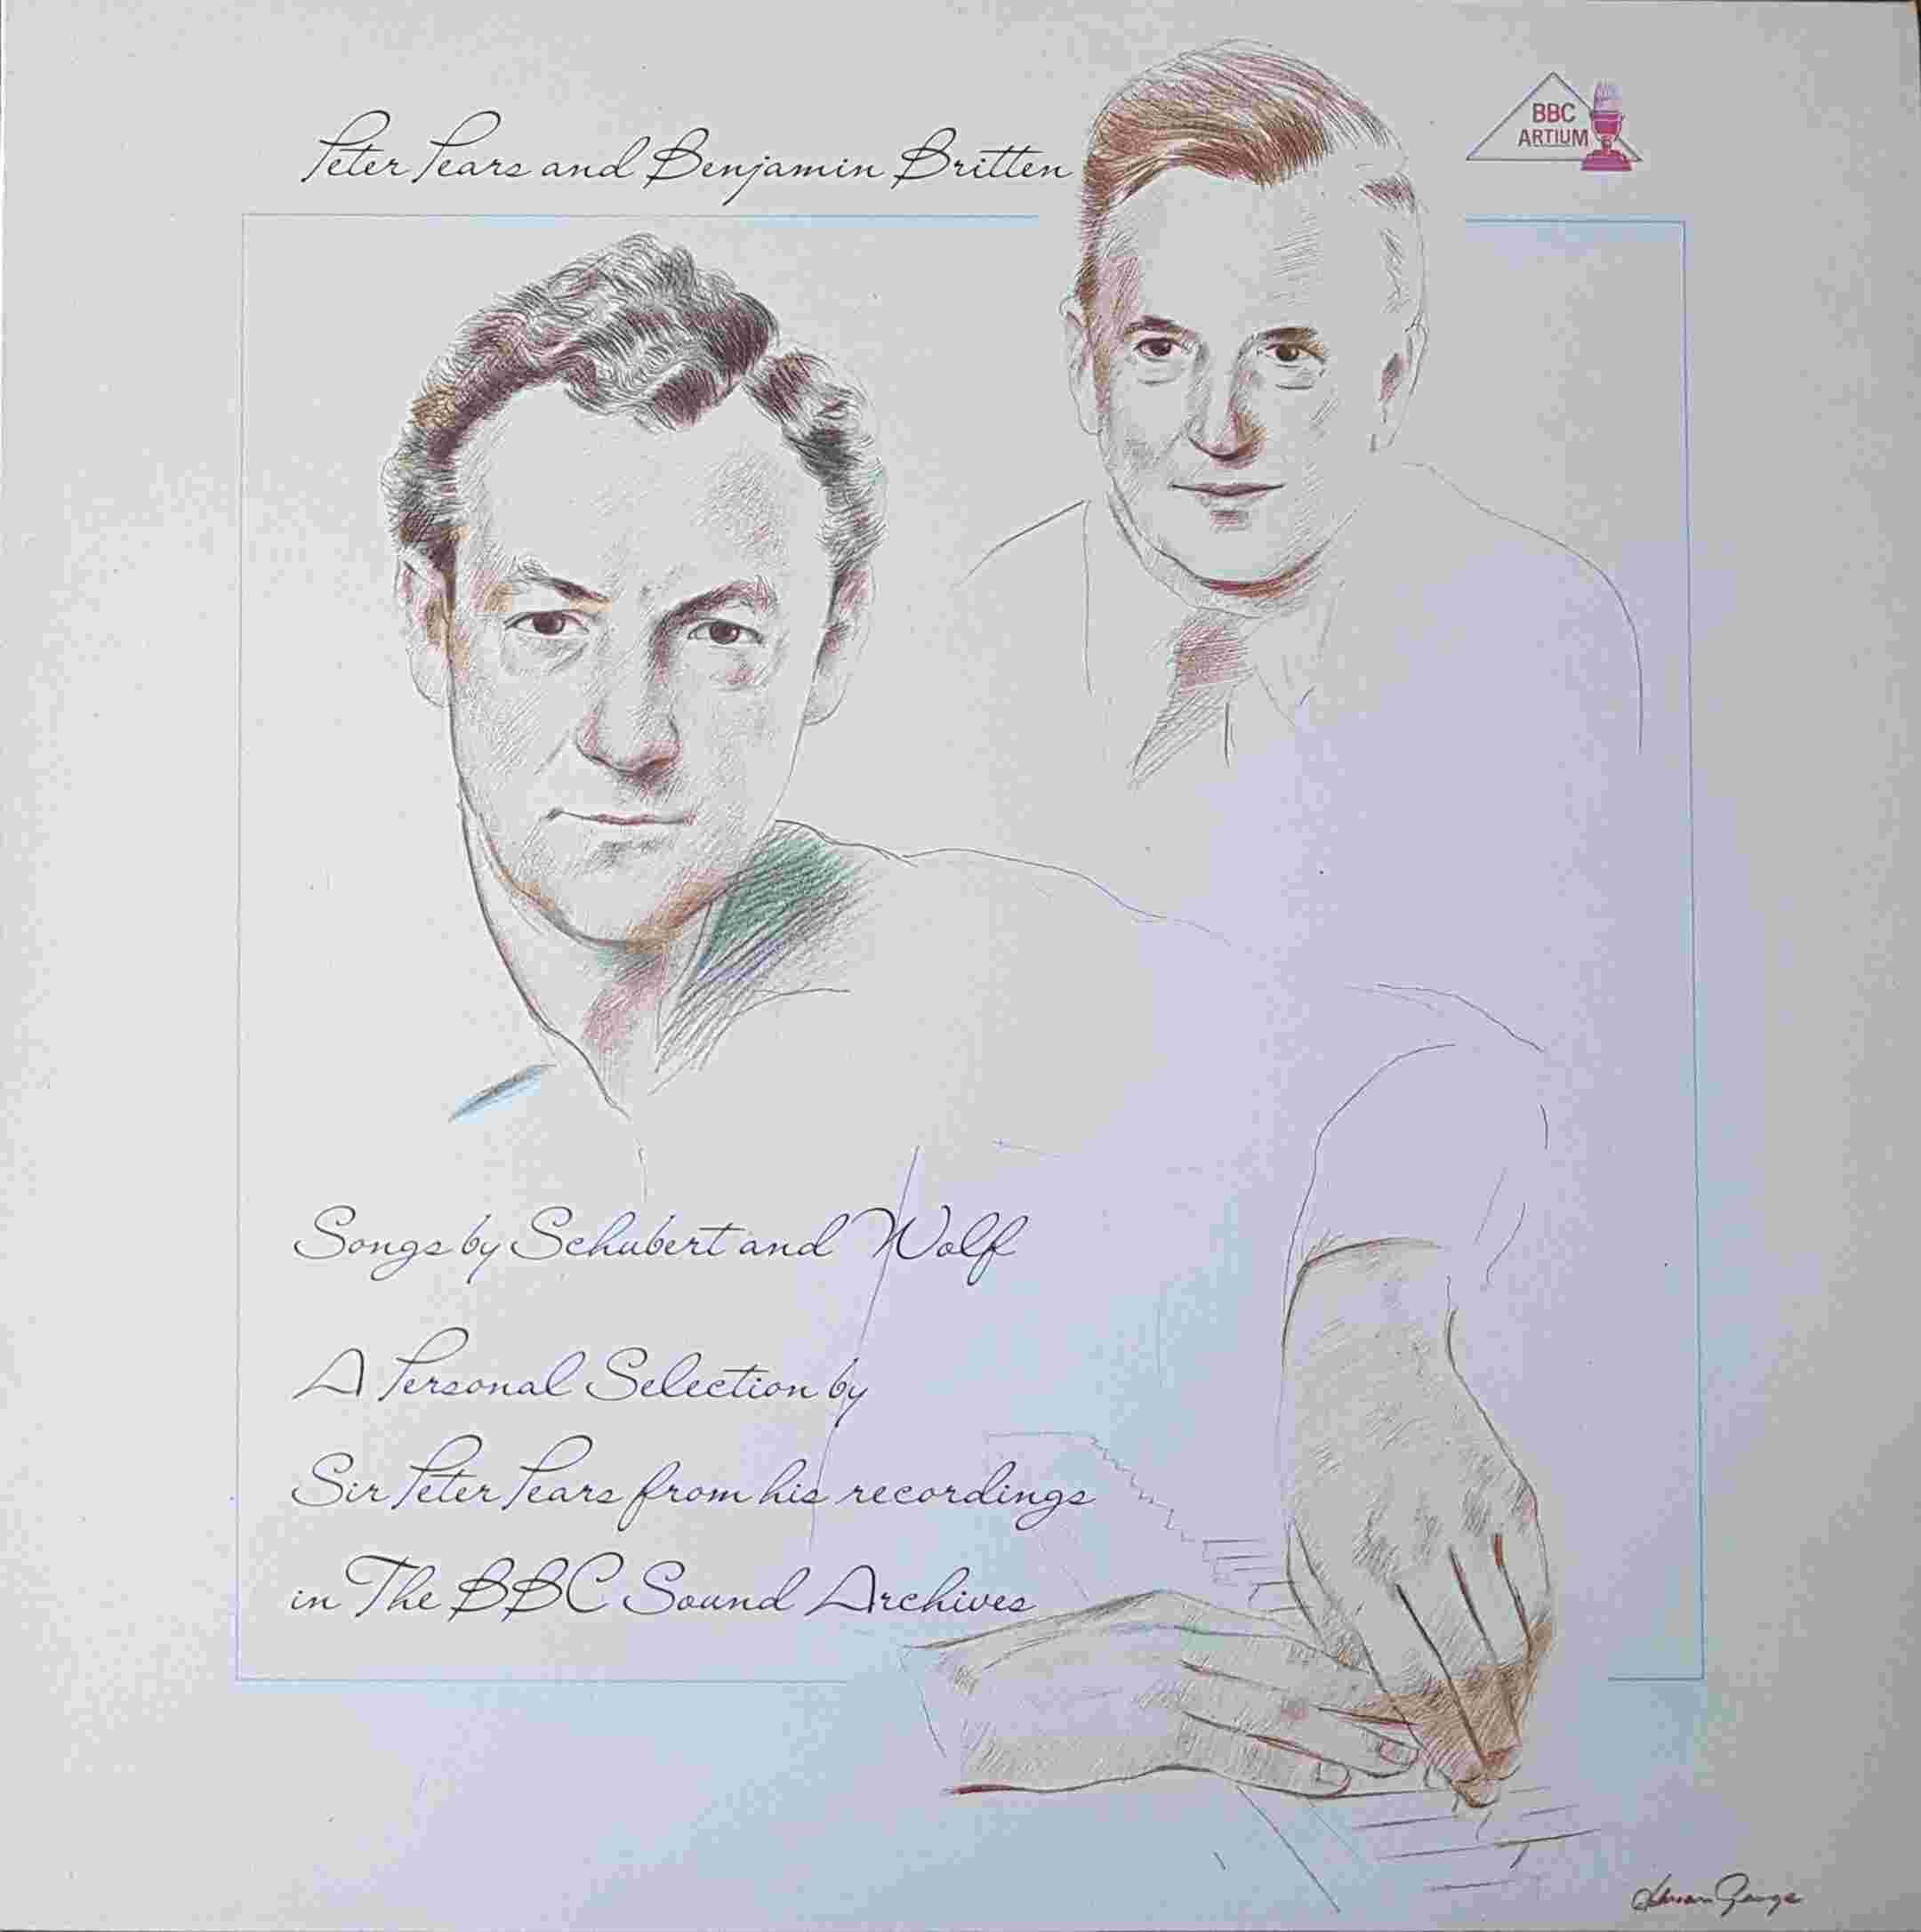 Picture of REGL 410 Peter Pears and Benjamin Britten by artist Peter Pears / Benjamin Britten from the BBC records and Tapes library